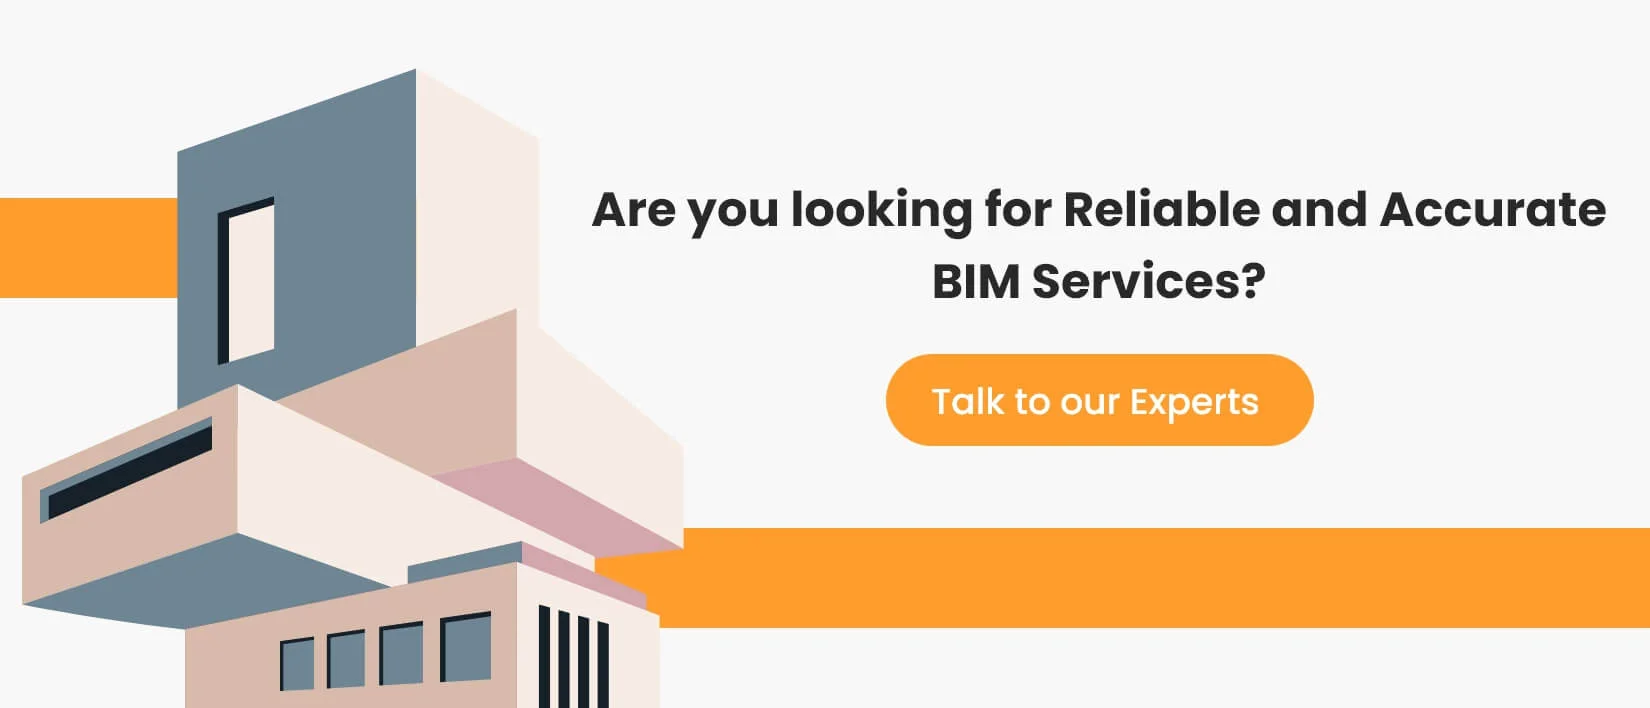 Are you looking for Reliable and Accurate BIM Services